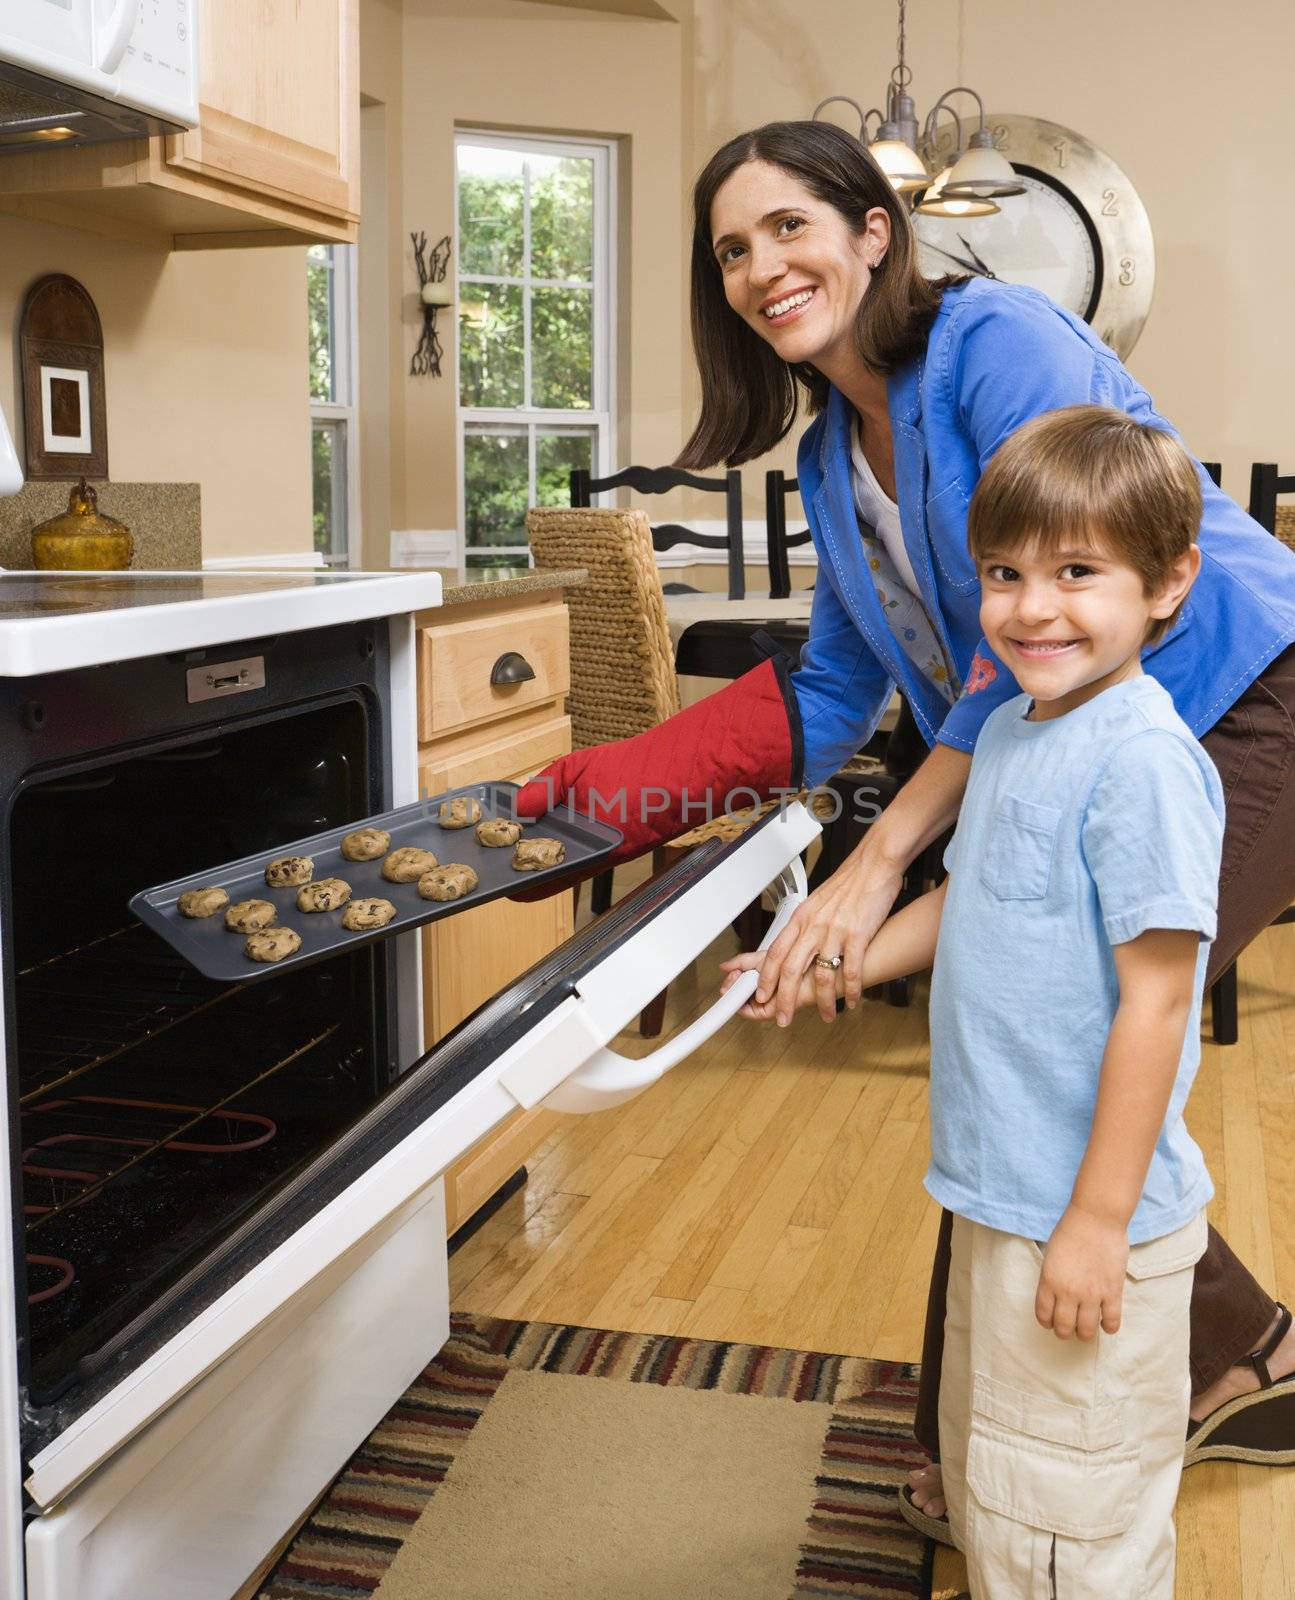 Hispanic mother and son putting cookies into oven and smiling at viewer.